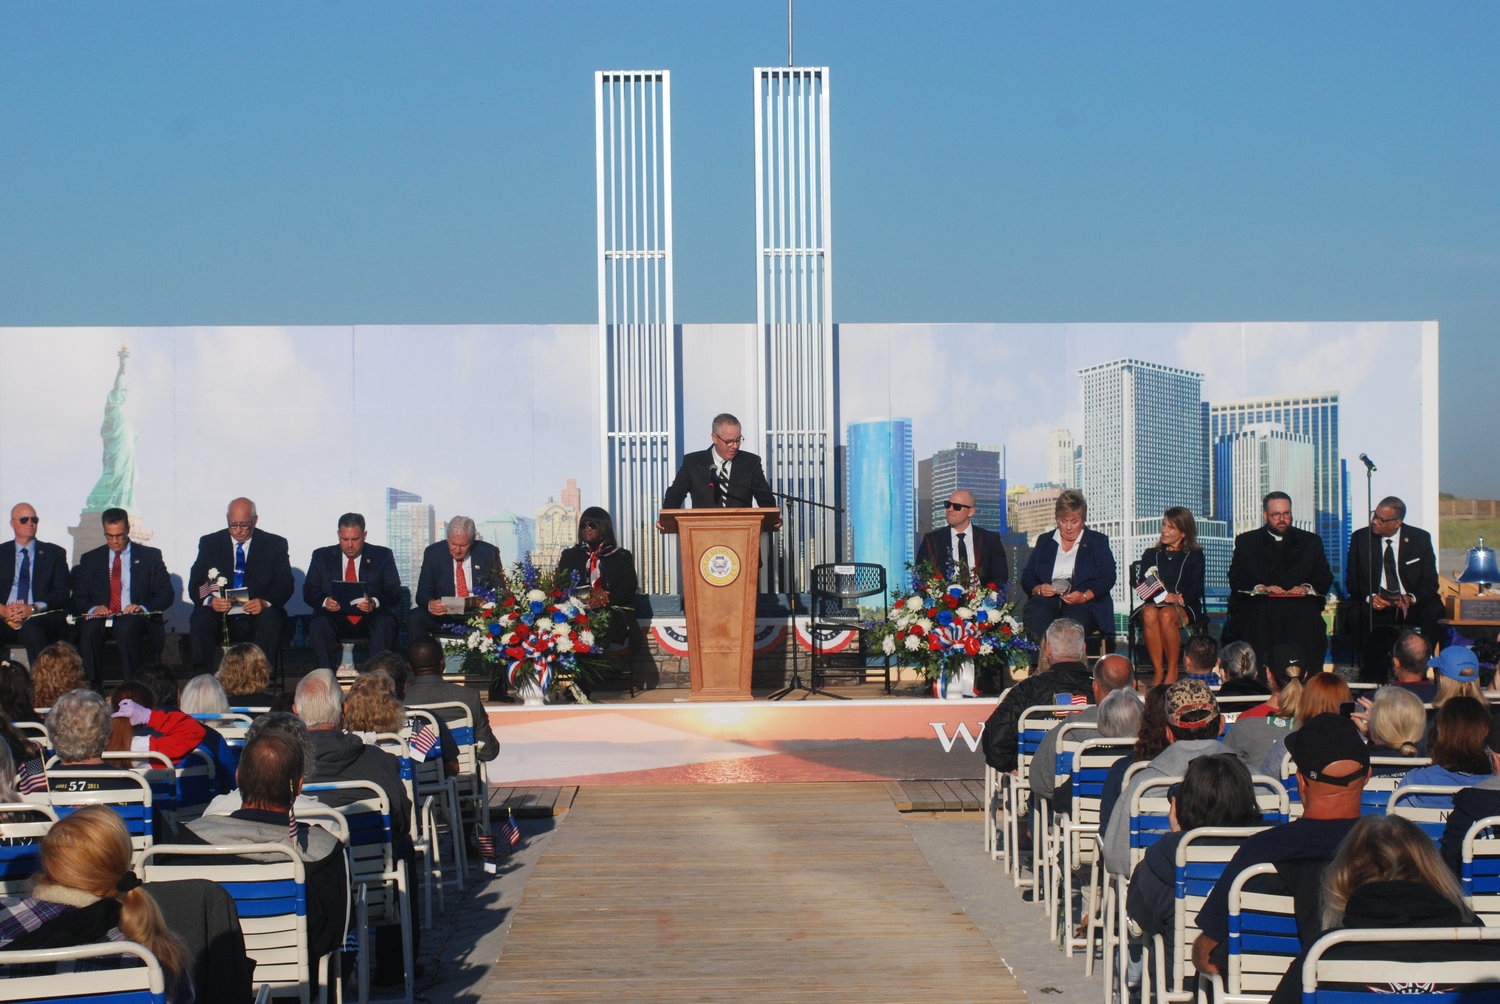 Two aluminum replicas of the twin towers formed the backdrop for the ceremony.